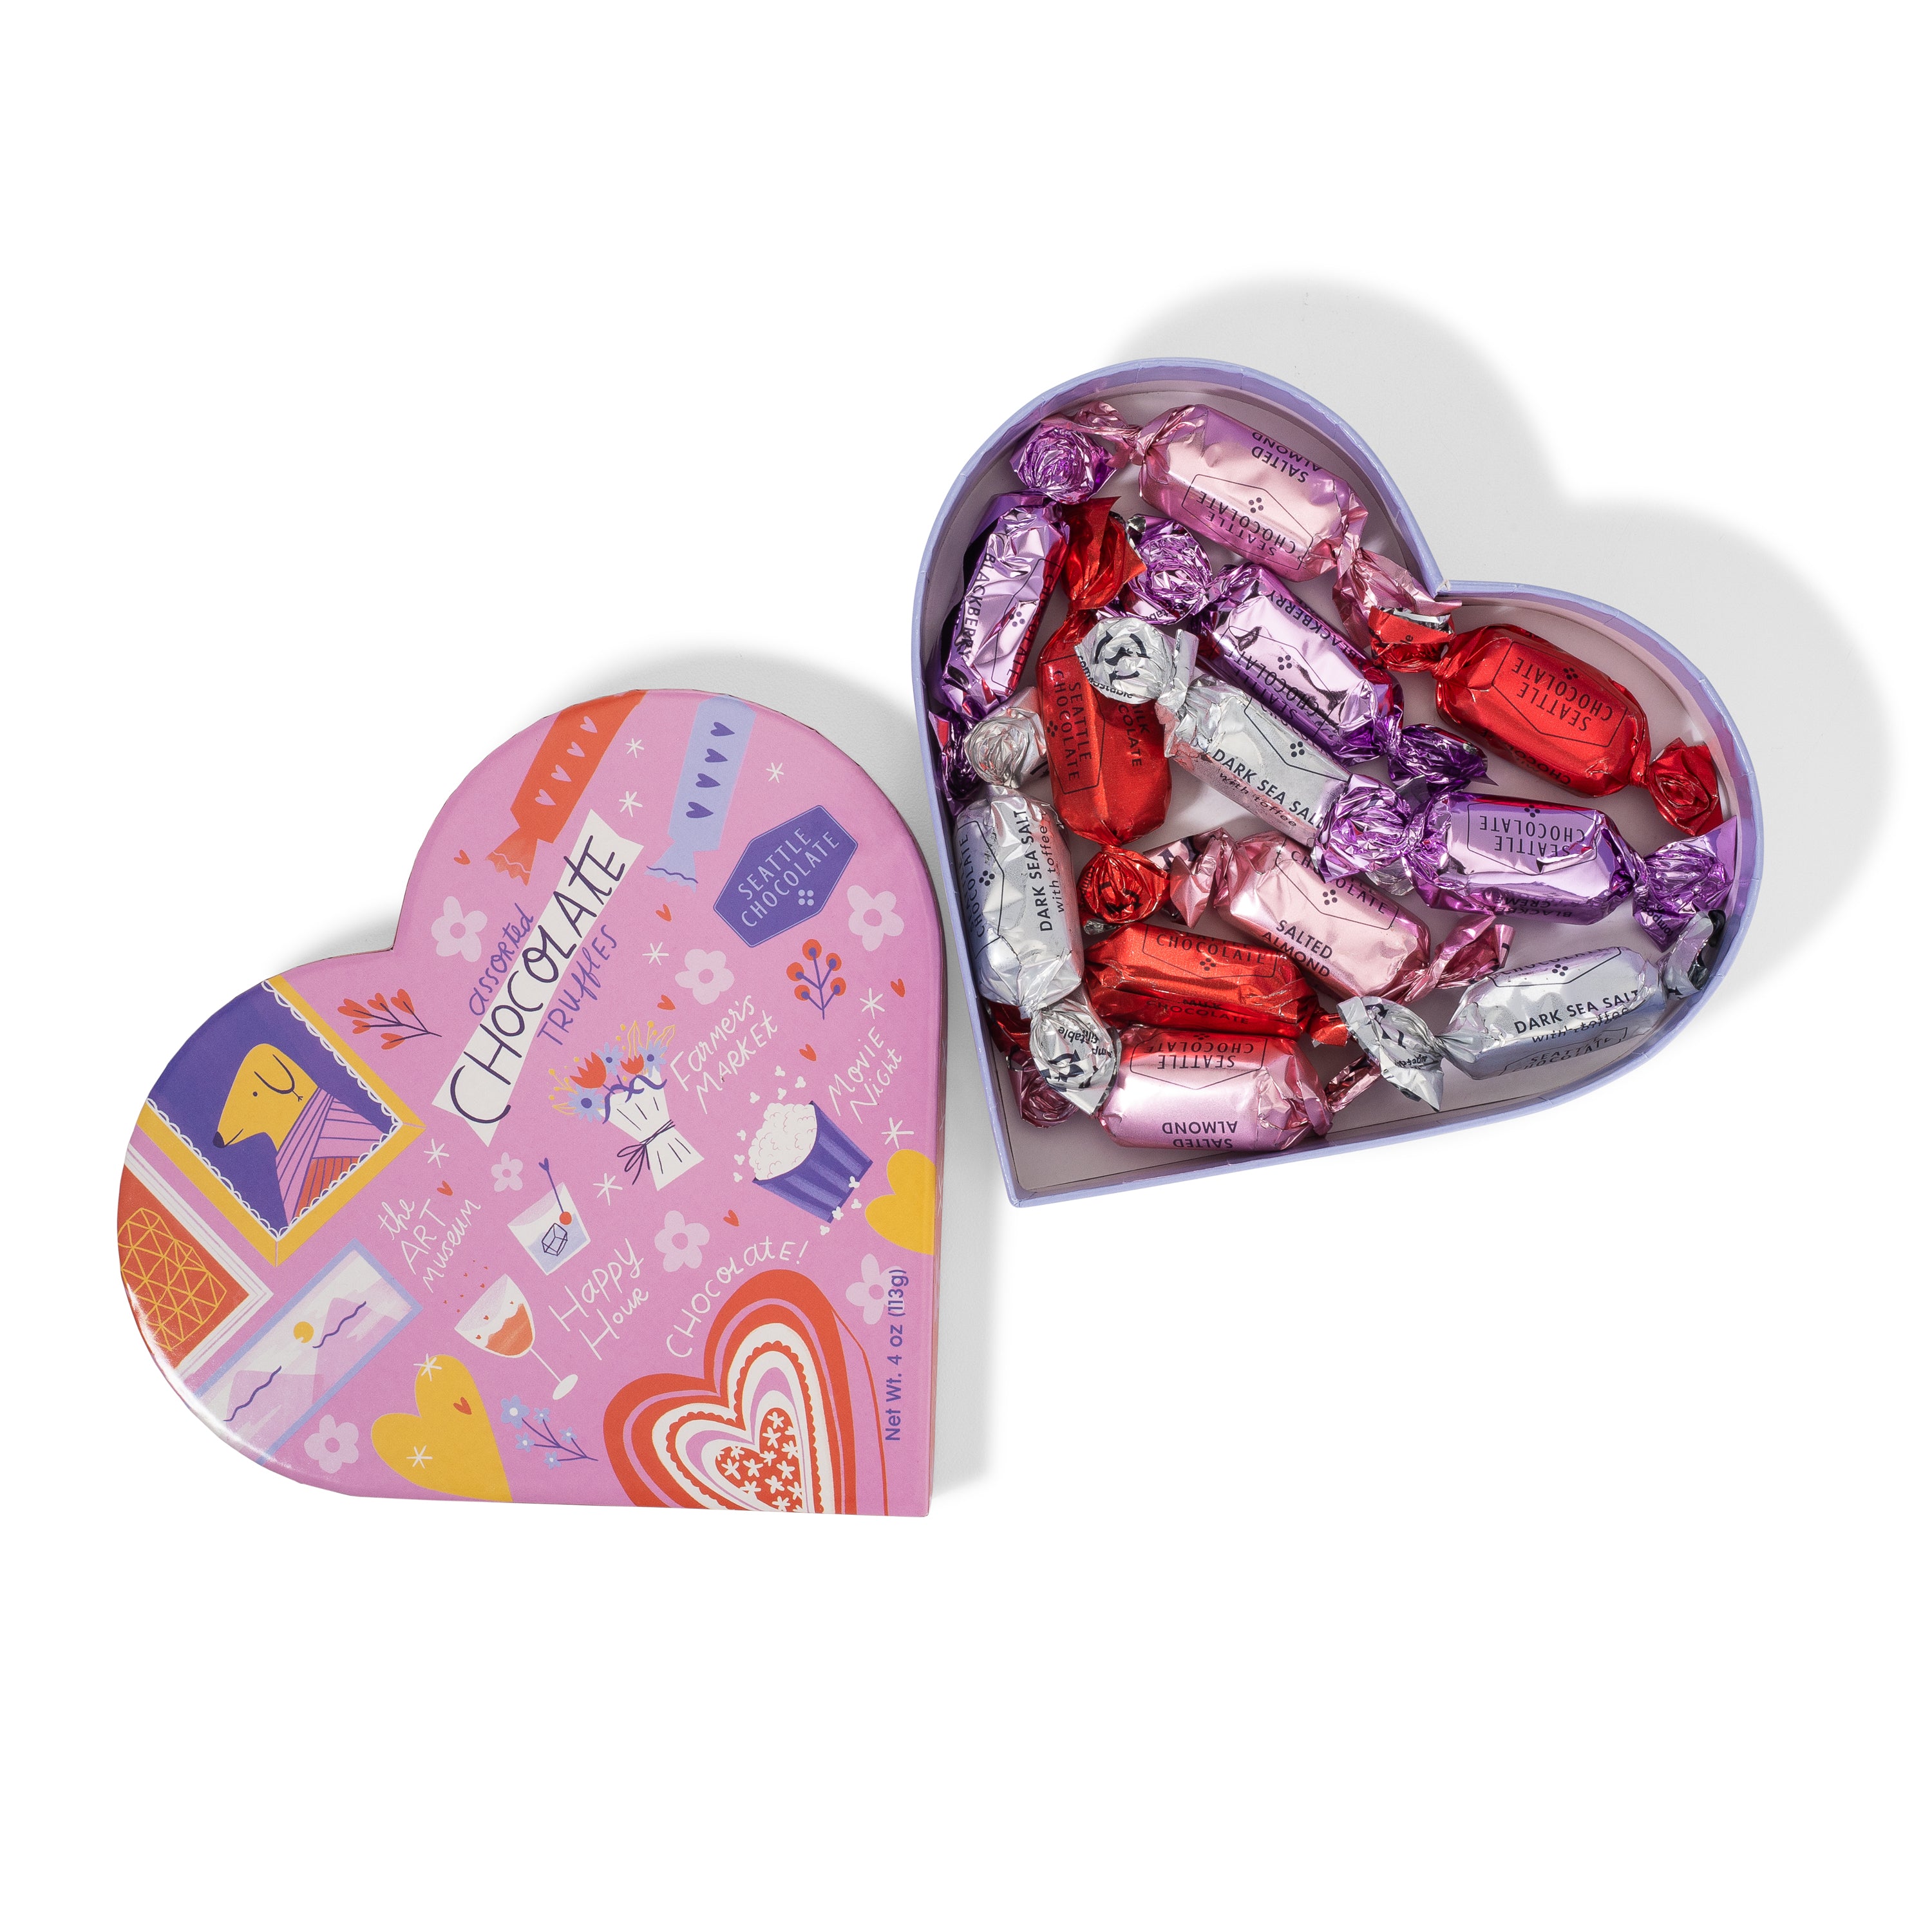 To Do With You Chocolate Truffles Heart Box (4 oz)